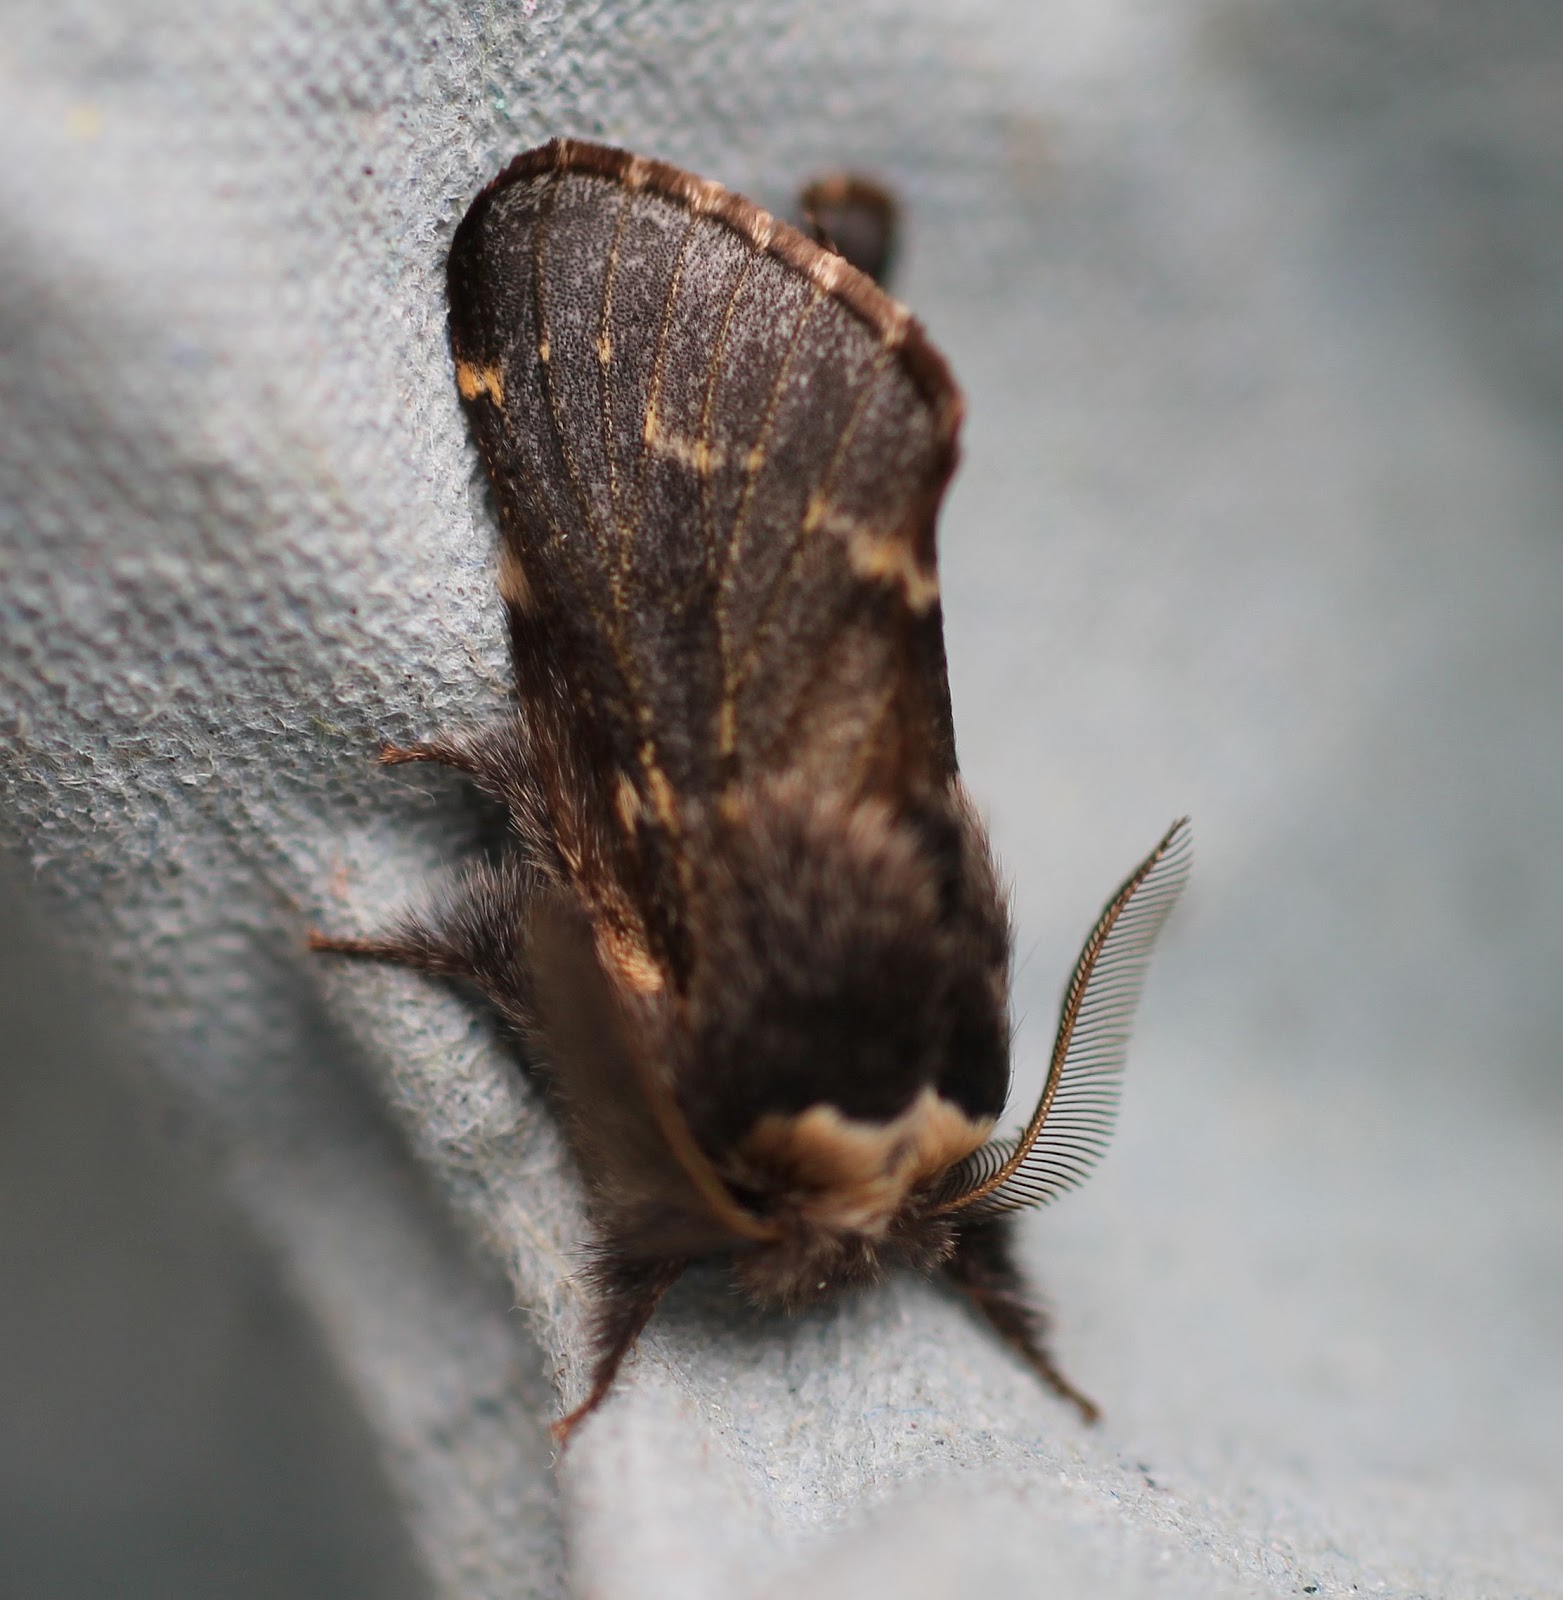 Shandy Hall Moths: 5 November 2012 - A month early...